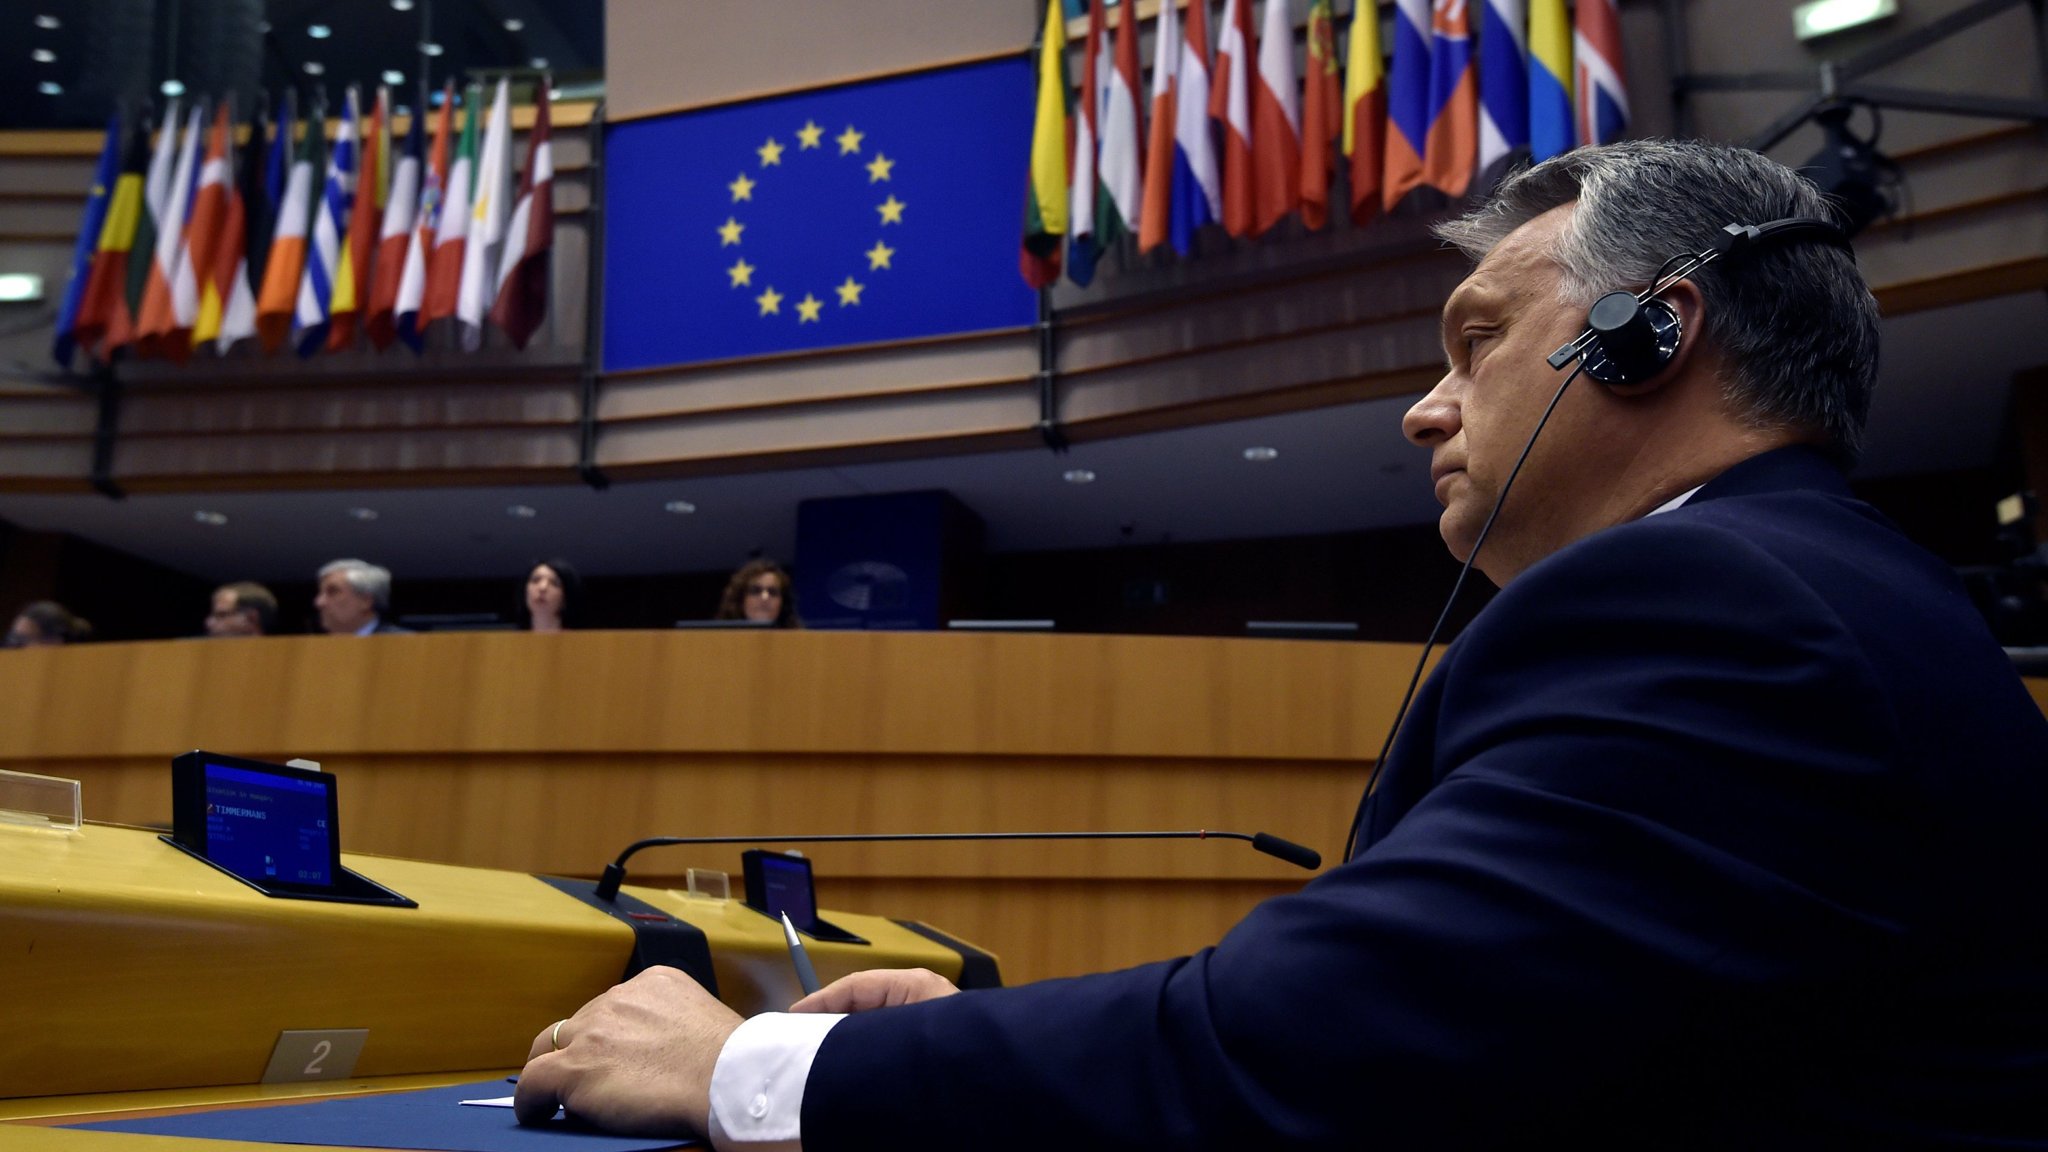 Hungary's Prime Minister Viktor Orban looks up during a plenary session at the European Parliament (EP) in Brussels, Belgium April 26, 2017. REUTERS/Eric Vidal